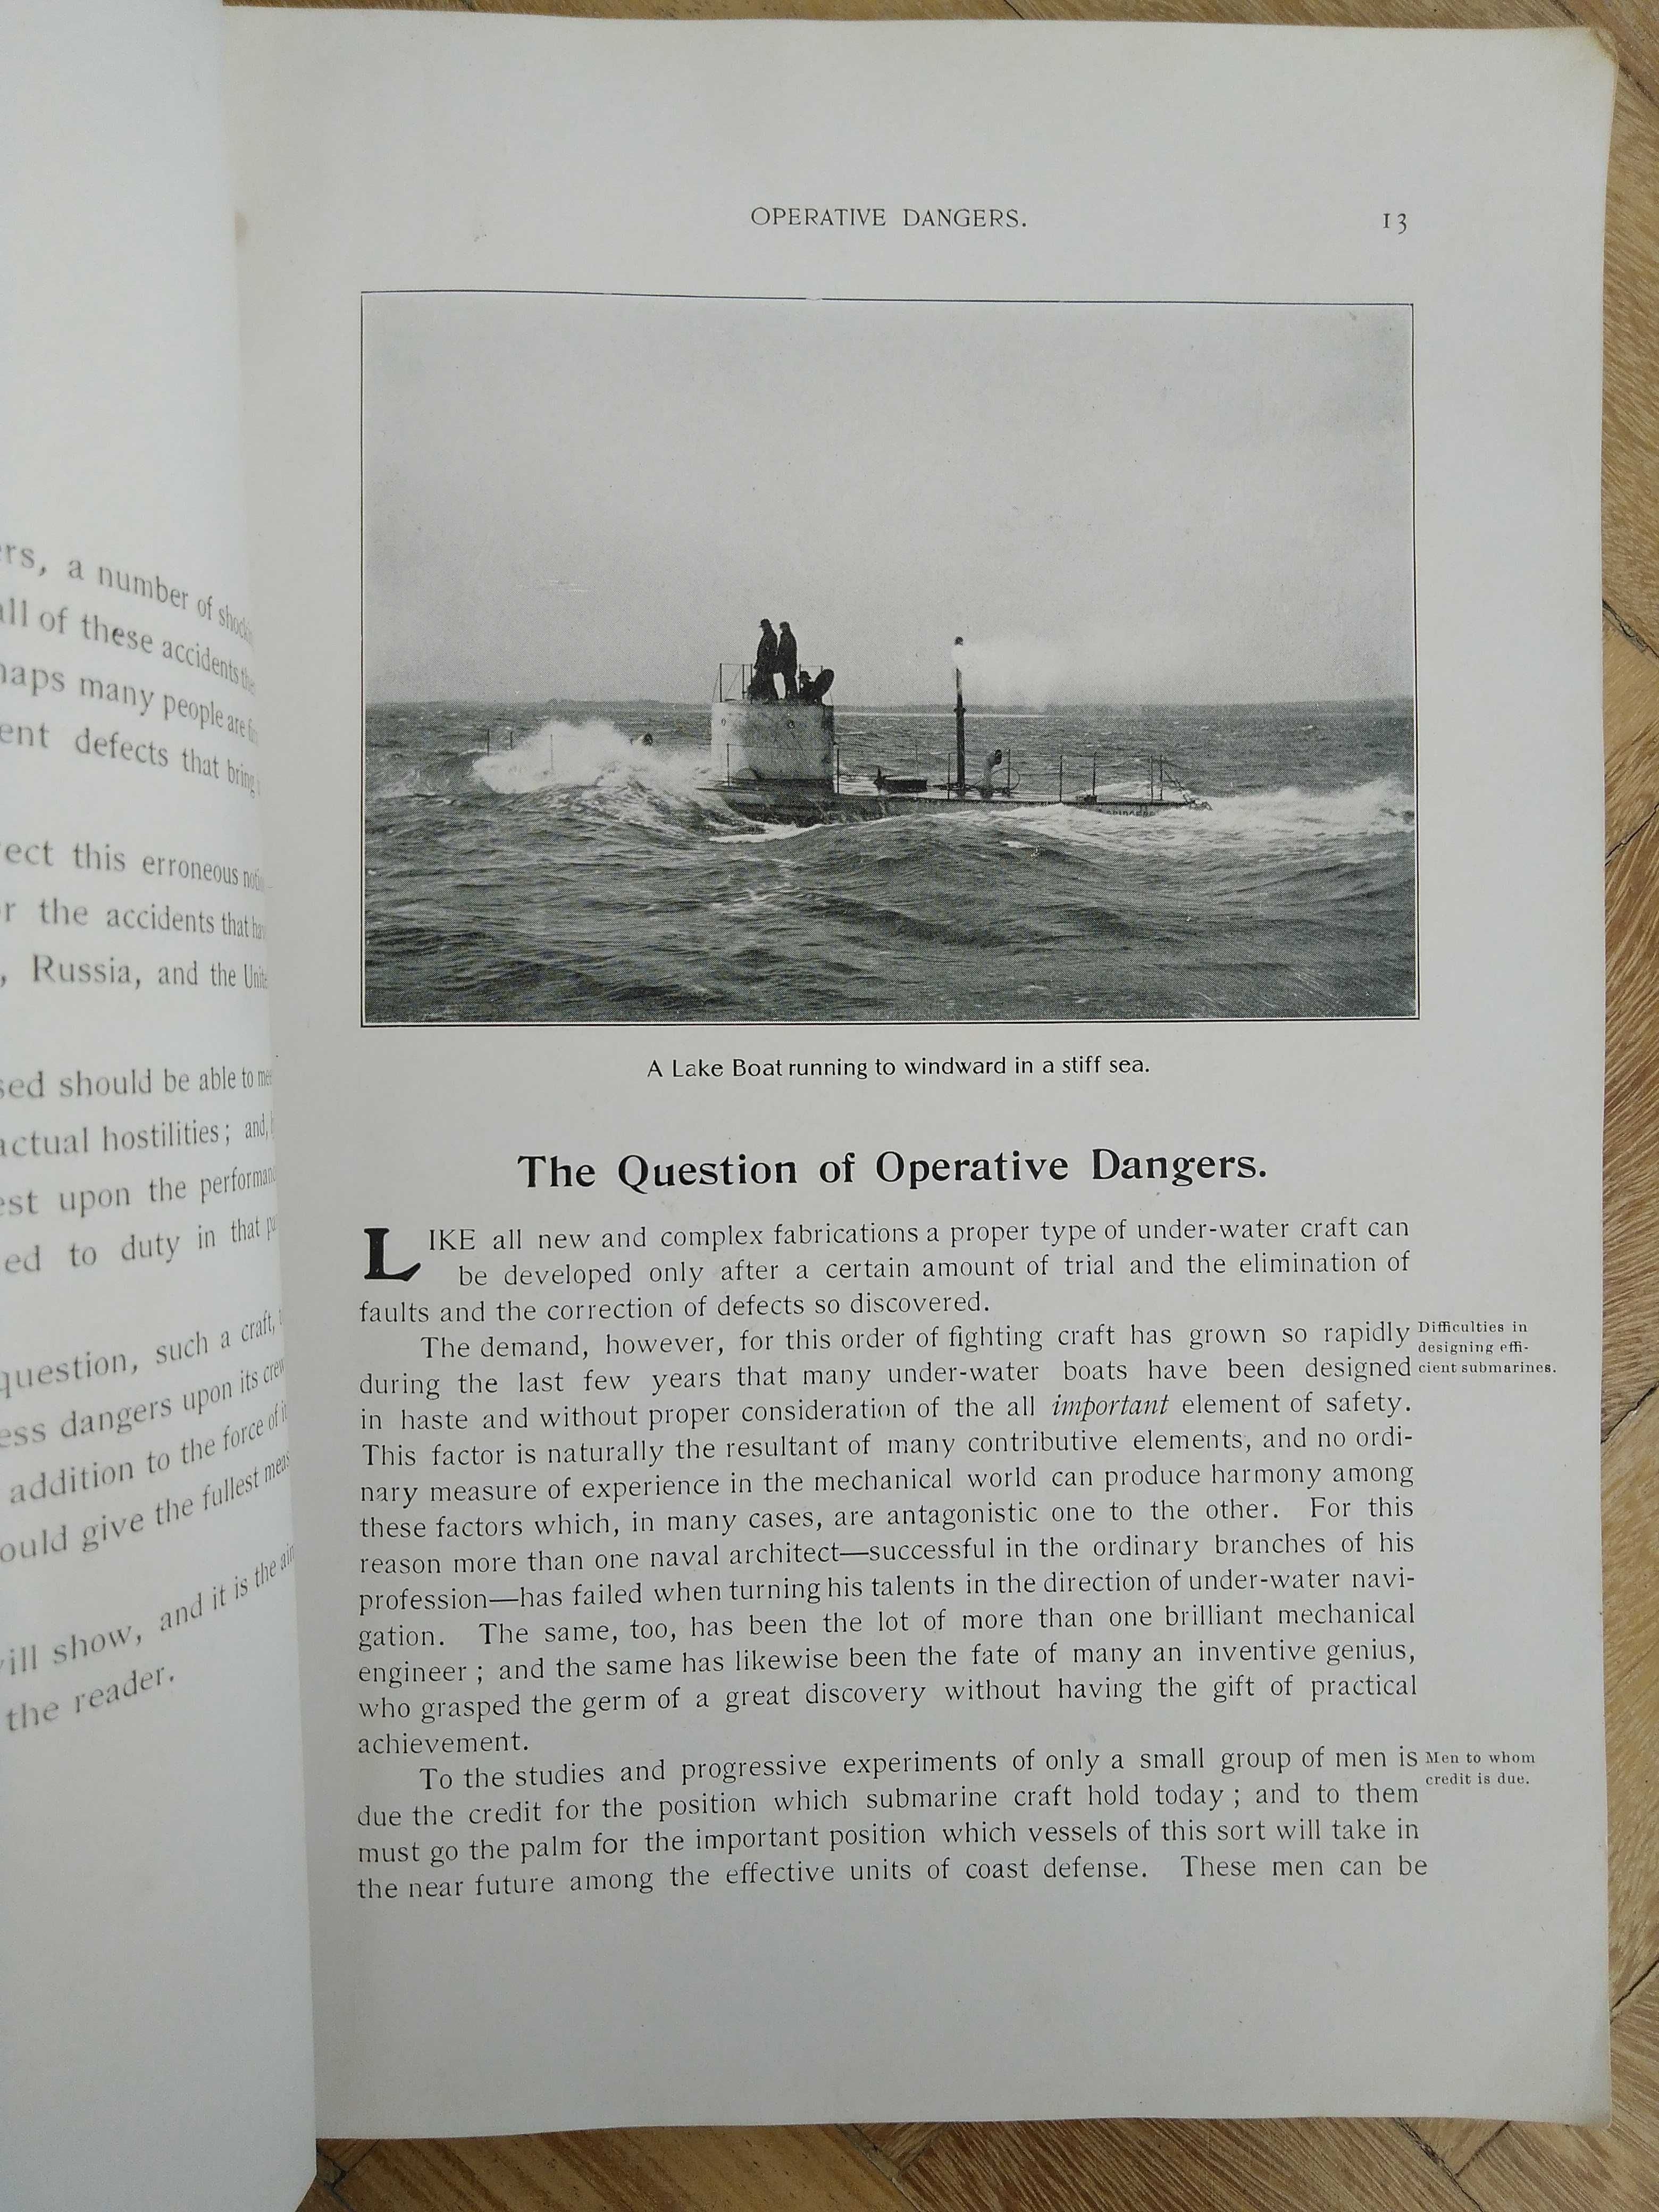 livro: “The diving submarine vs. The even keel submersible”, 1906